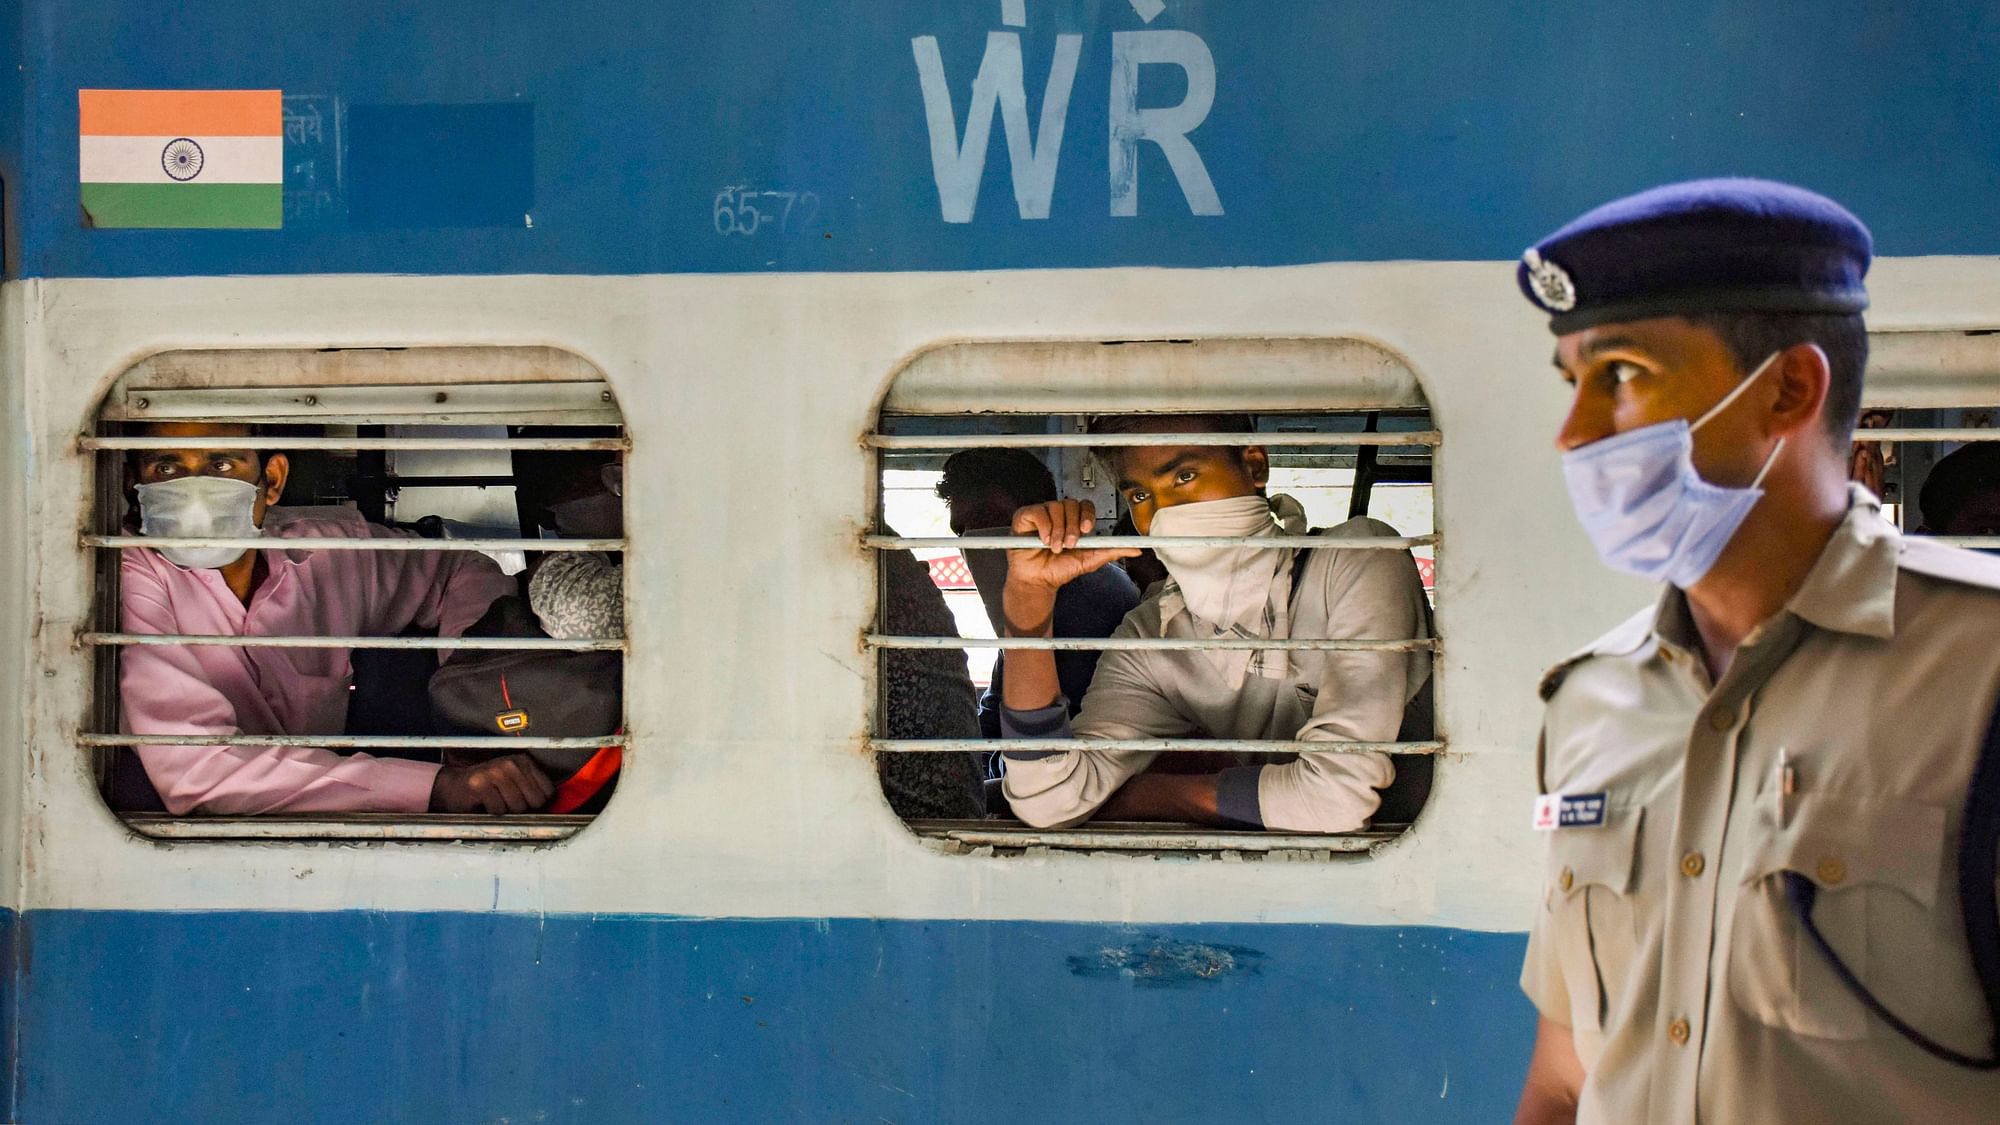 Passengers aboard a Shramik train have had to spend almost three days to reach their respective destinations as trains got diverted. Image used for representational purpose.